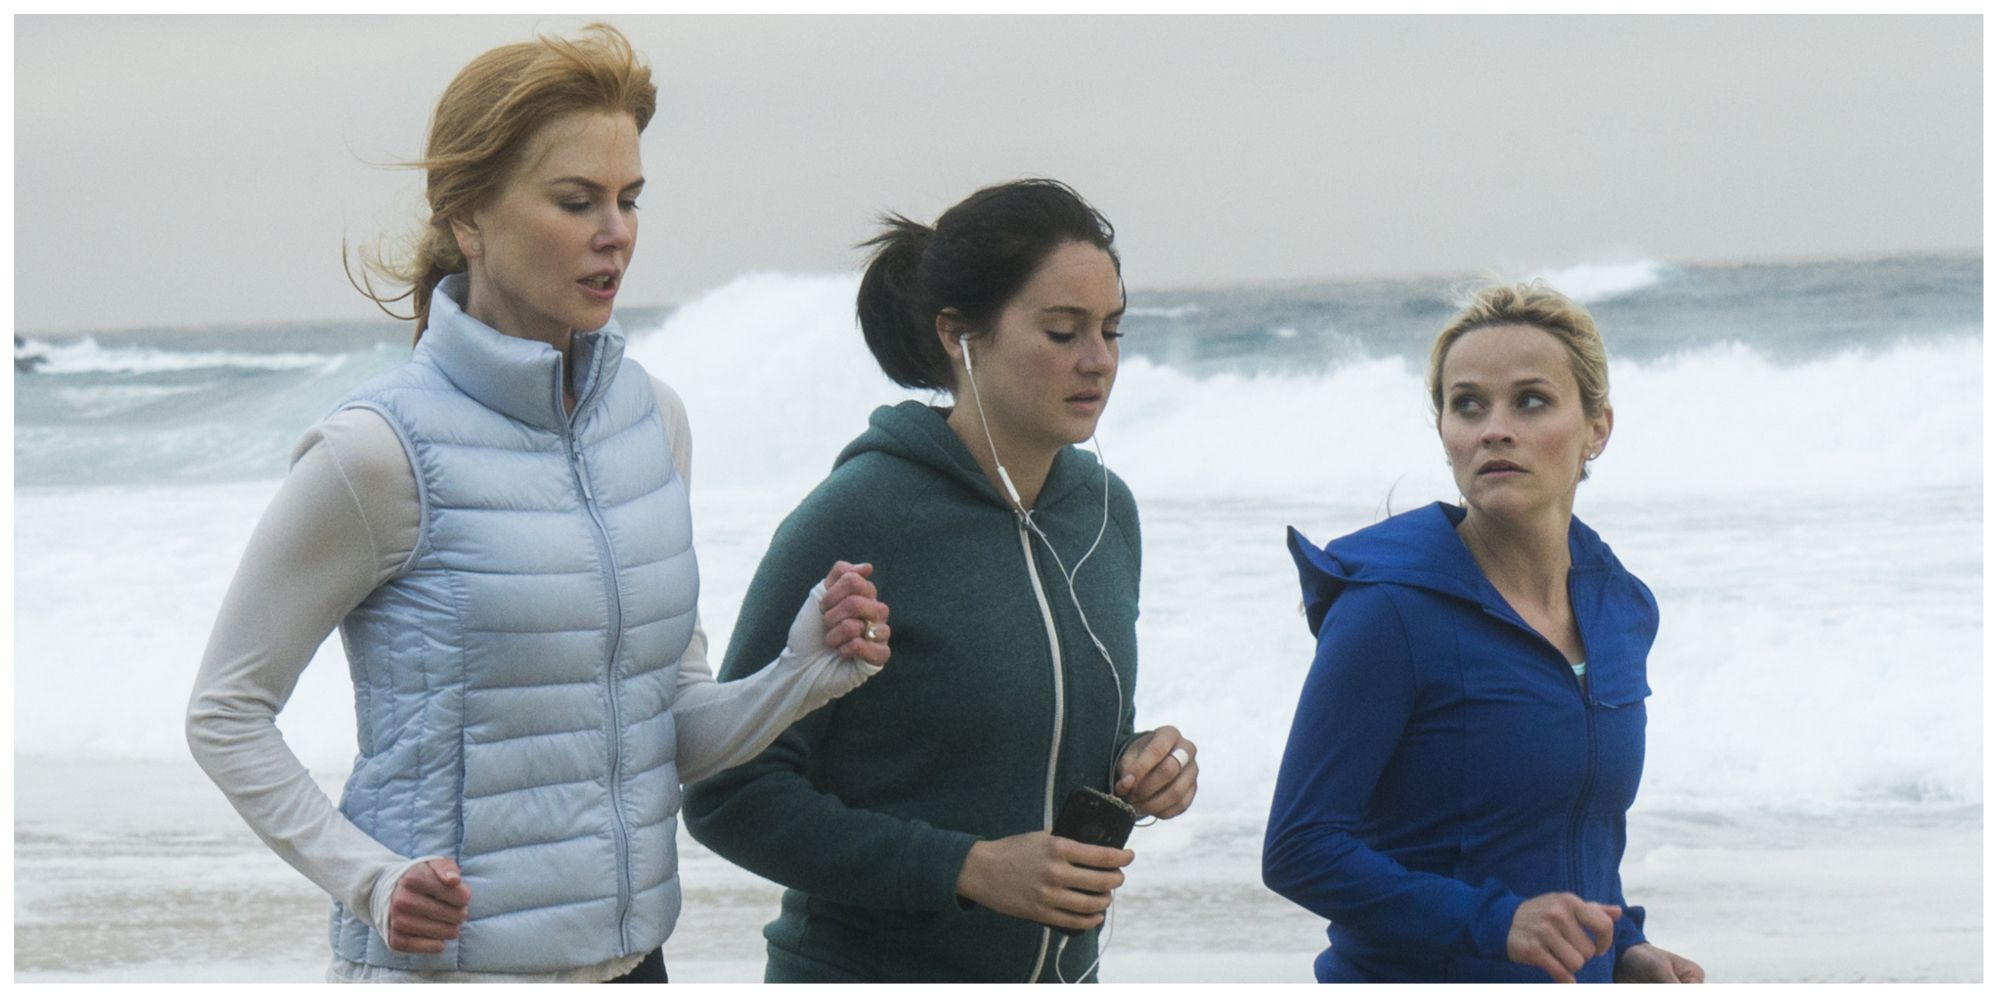 From left to right: Nicole Kidman, Shailene Woodley and Reese Witherspoon running along the beach in Big Little Lies